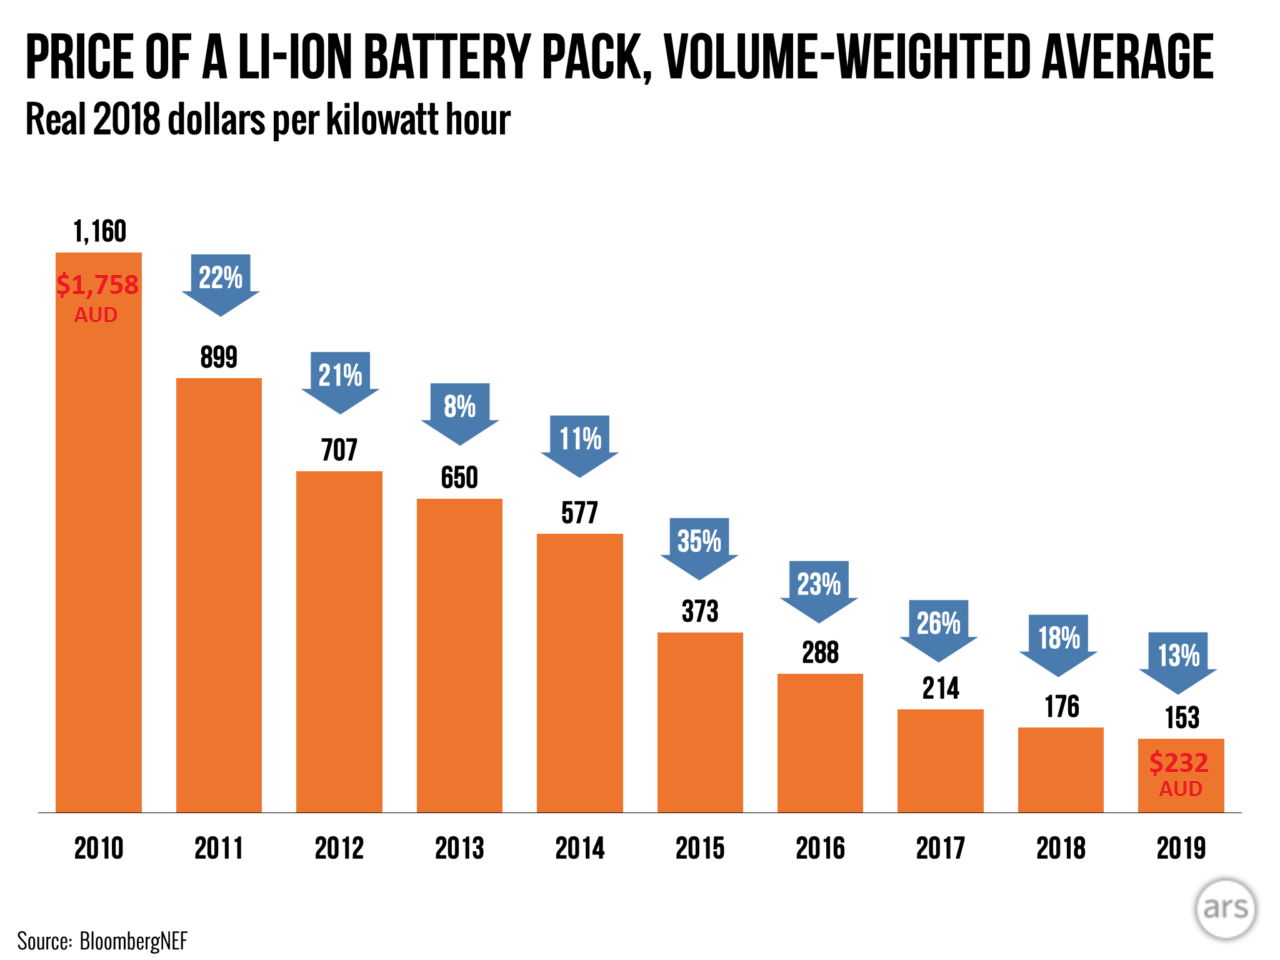 Why Have Home Battery Forecasts Been Staggeringly Wrong For Years?